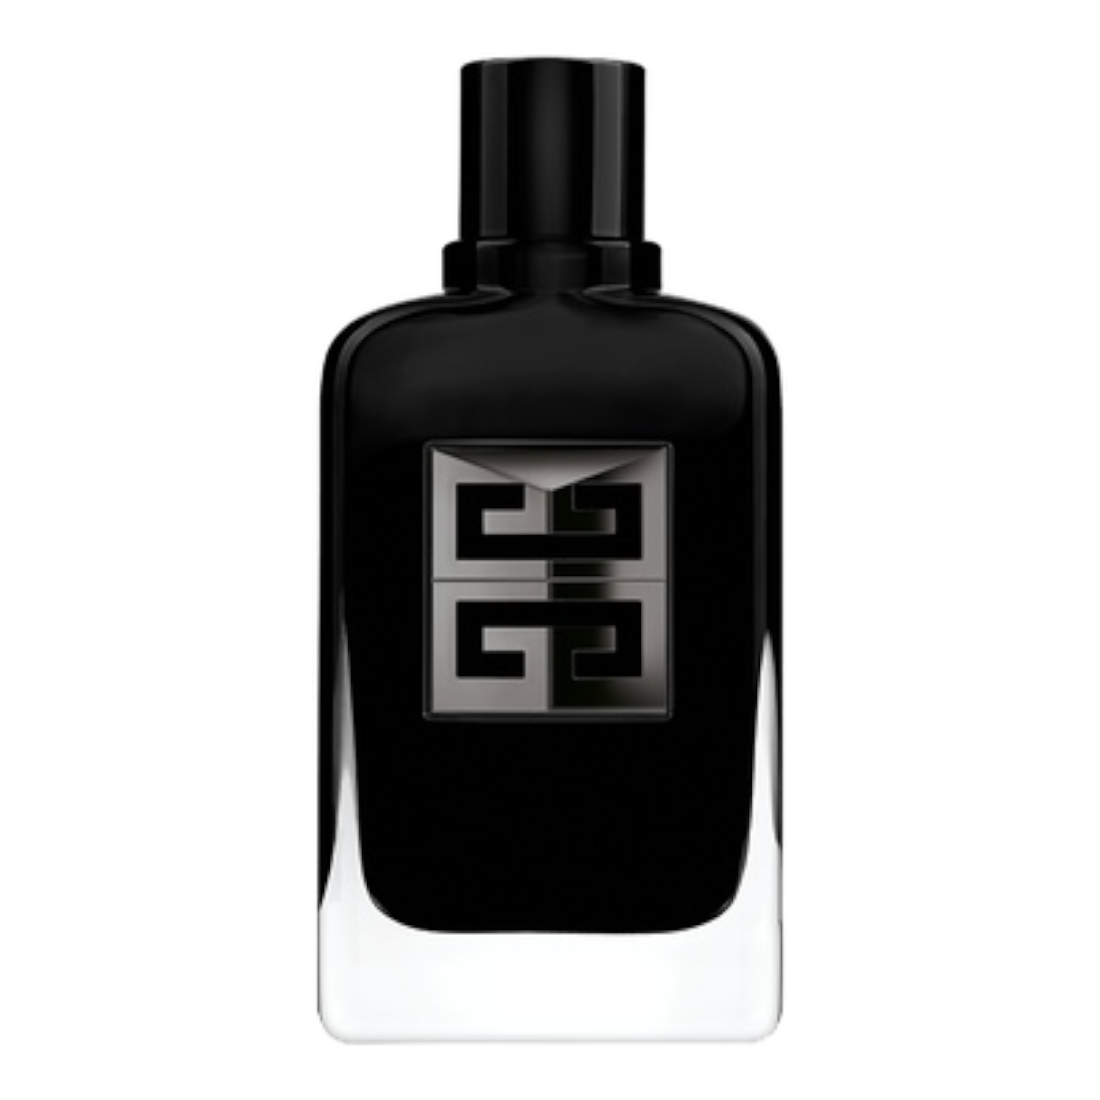 GIVENCHY GENTLEMAN SOCIETY EXTREME EDP 100ML TESTER